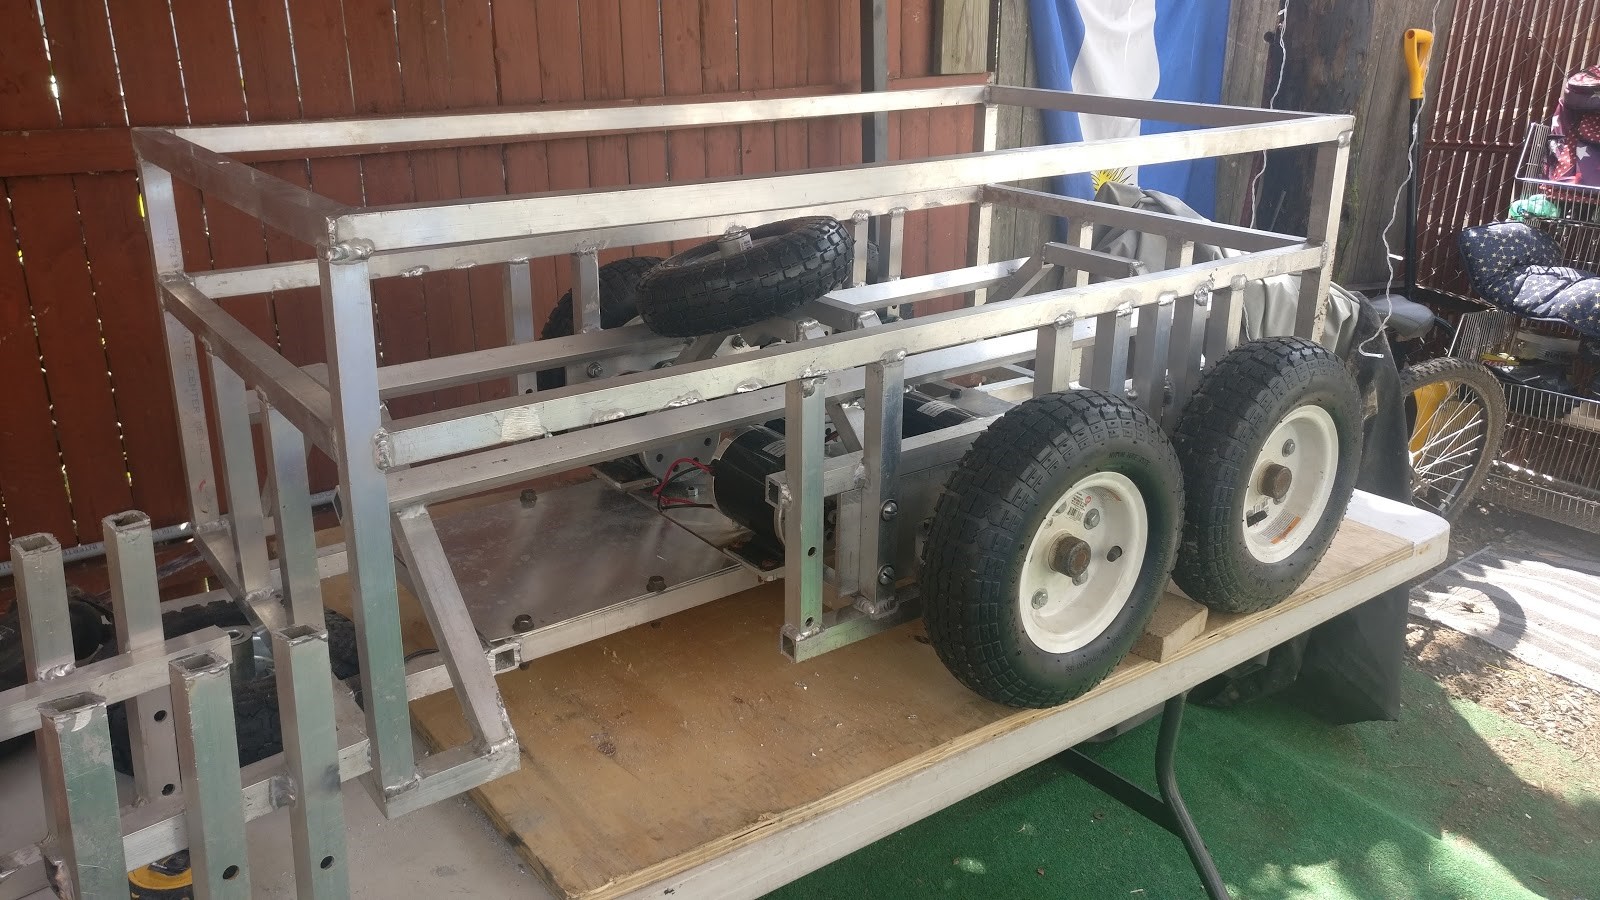 The second iteration of the robotic mule in progress. This design will have the four large wheel in the back, with a turning box set up at the front